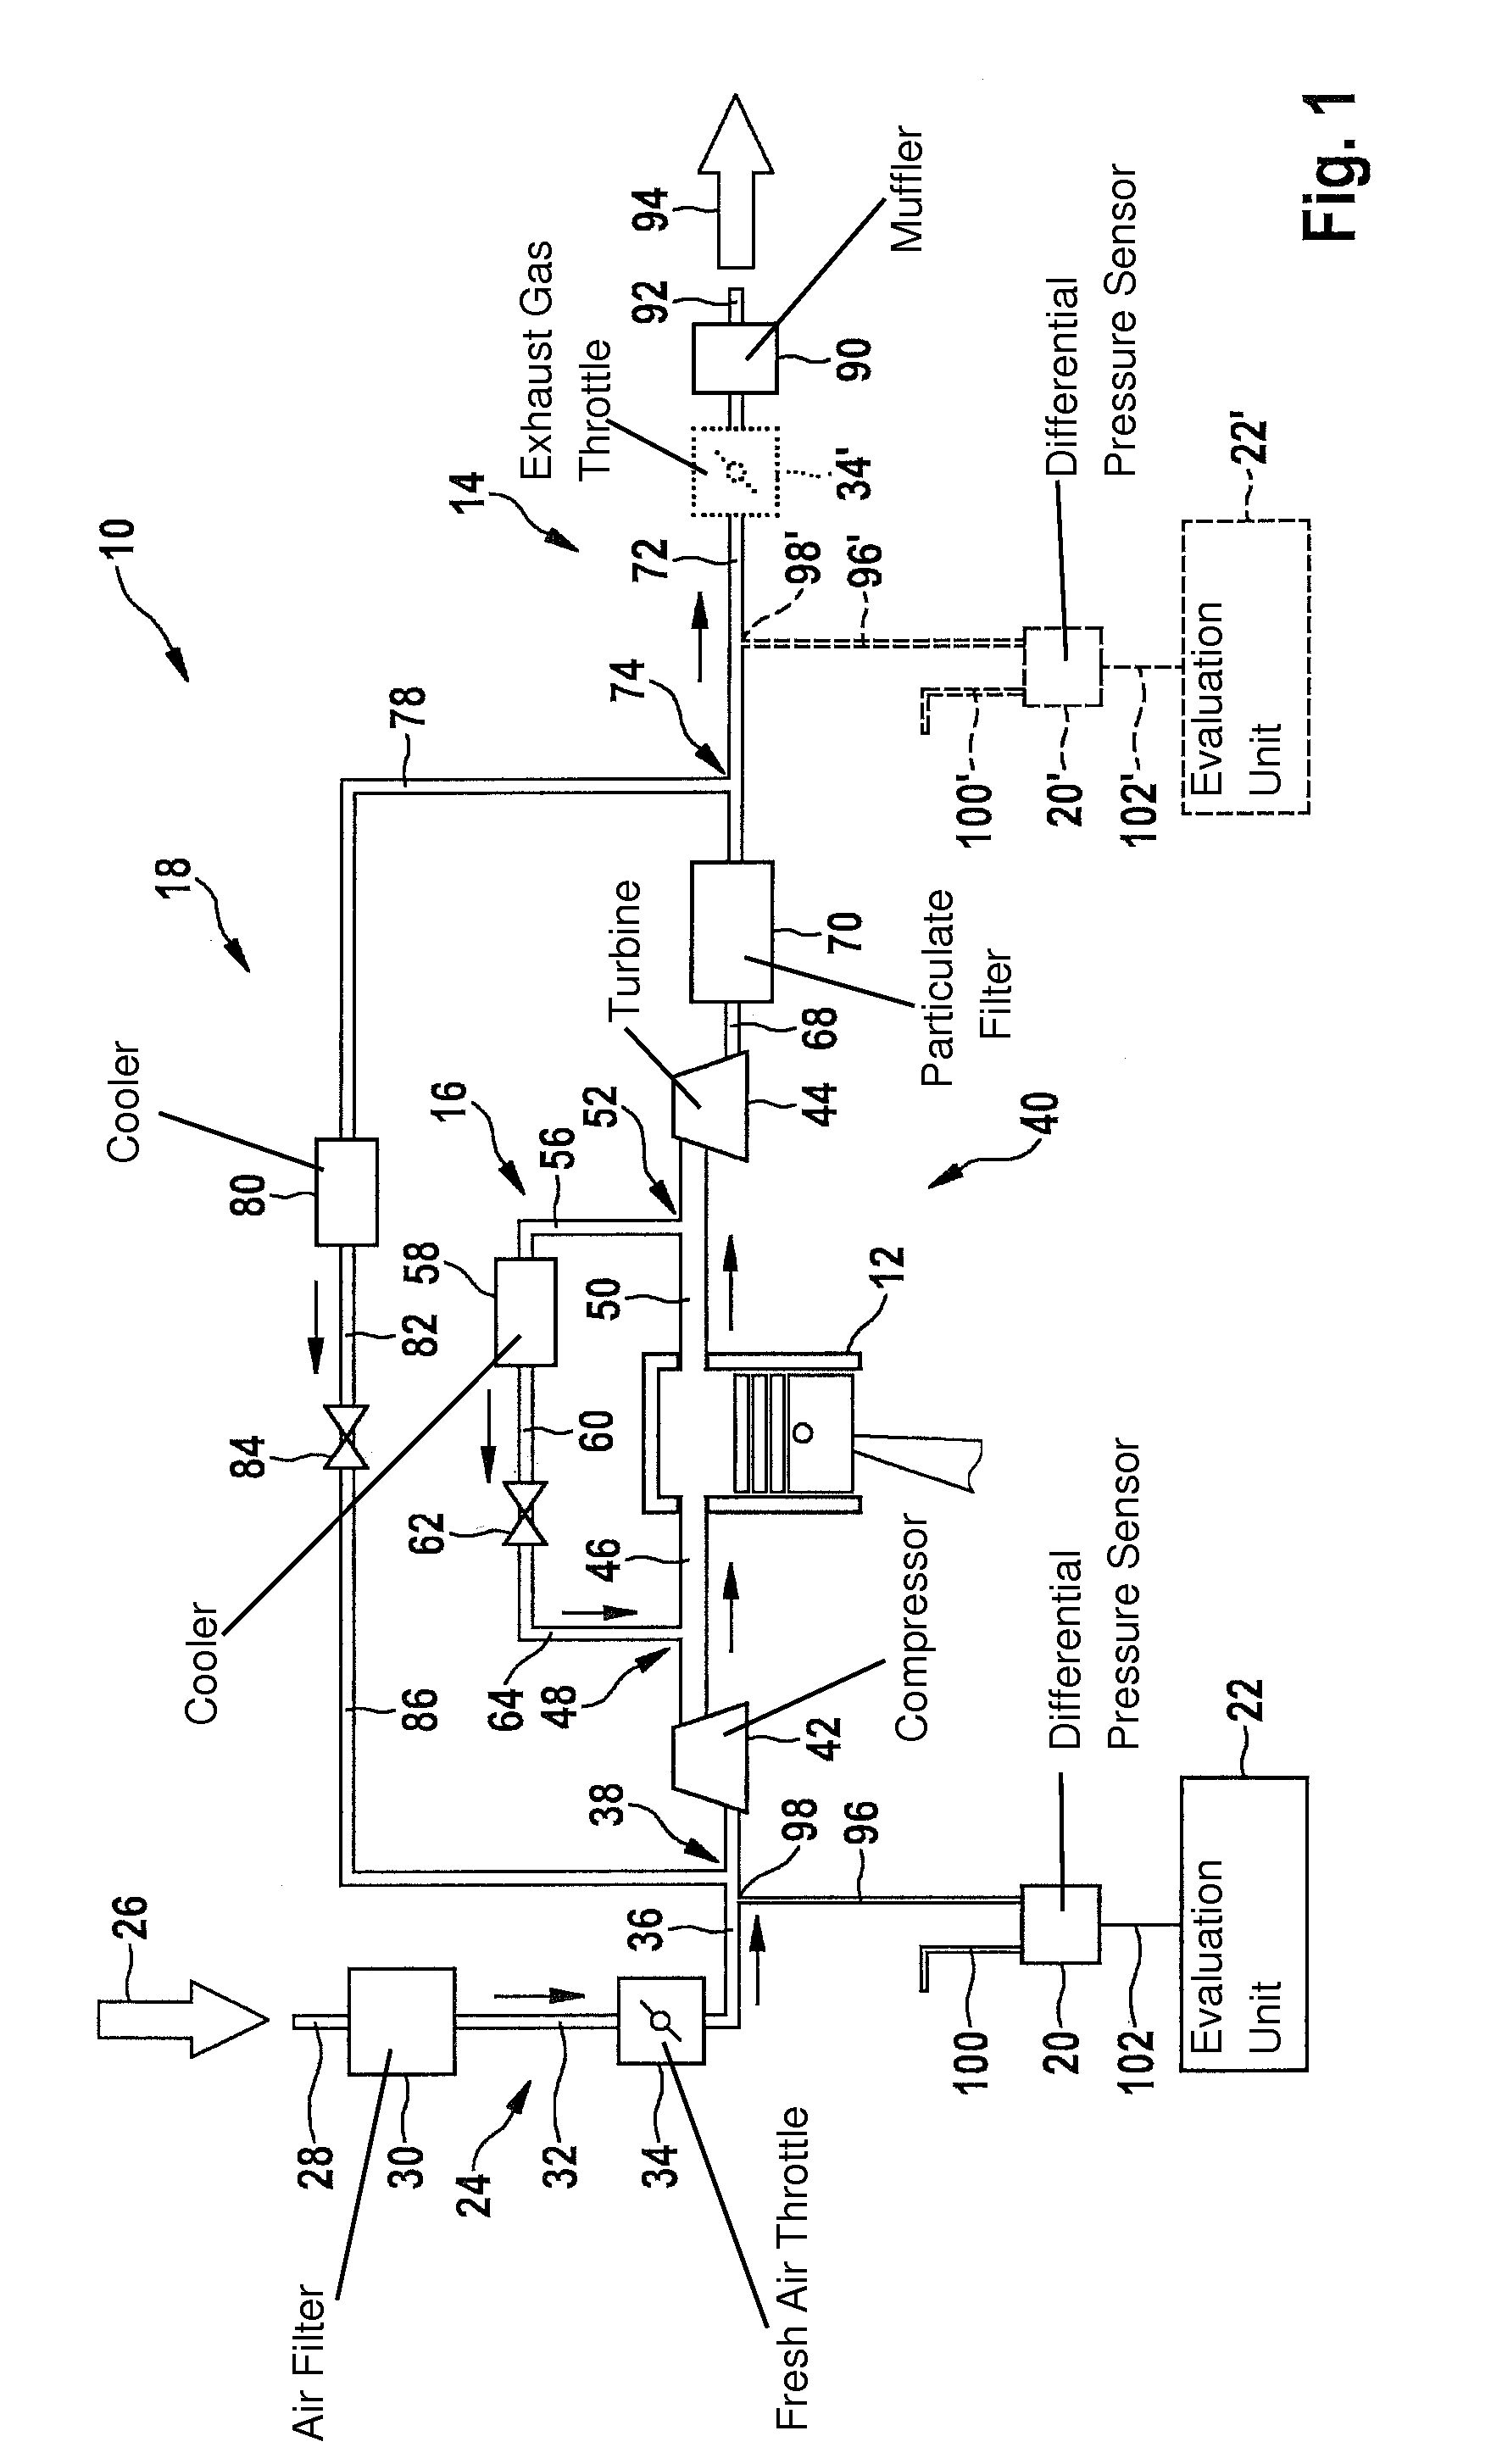 Drive system for a motor vehicle